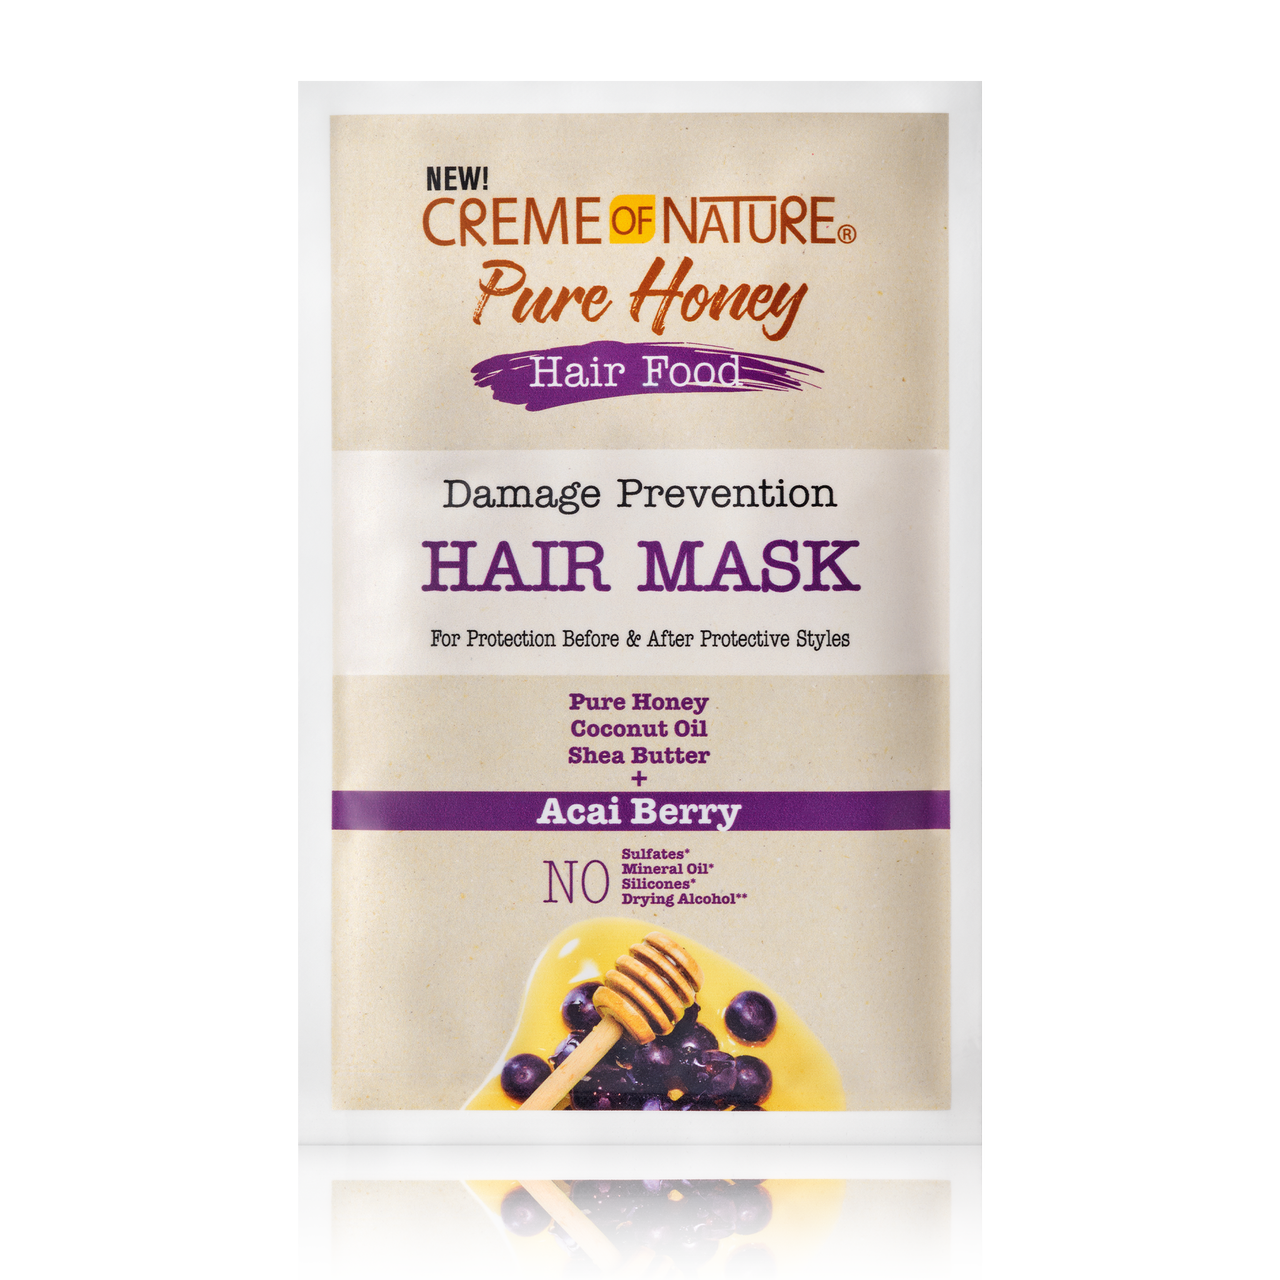 Damage Prevention Hair Mask - Creme of Nature®